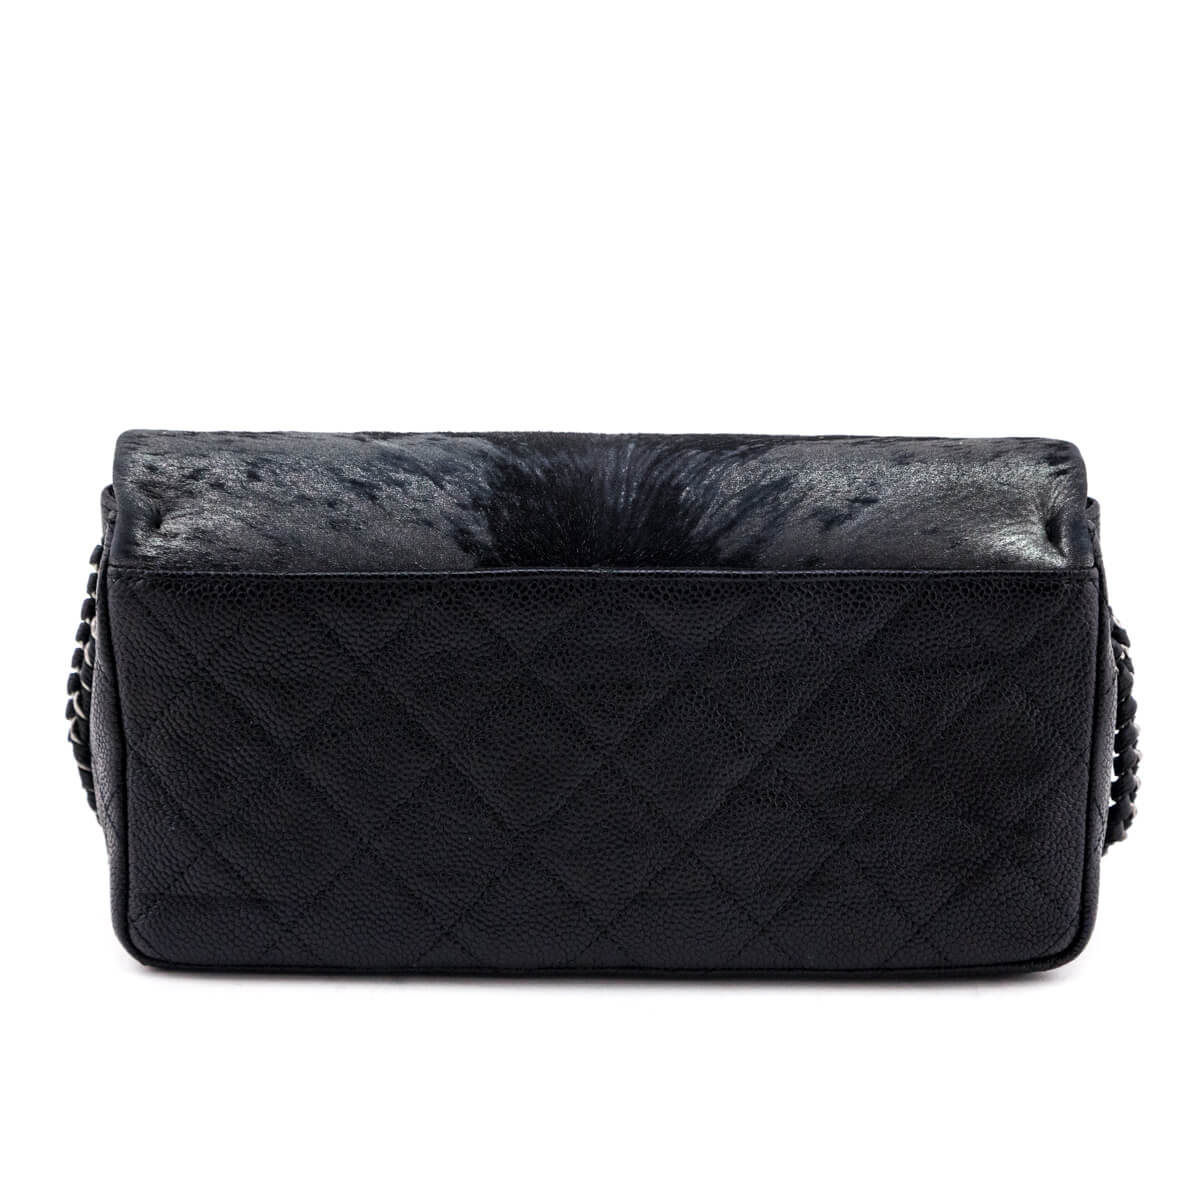 Chanel Black Metallic Pony Hair & Quilted Caviar Flap Bag - Love that Bag etc - Preowned Authentic Designer Handbags & Preloved Fashions